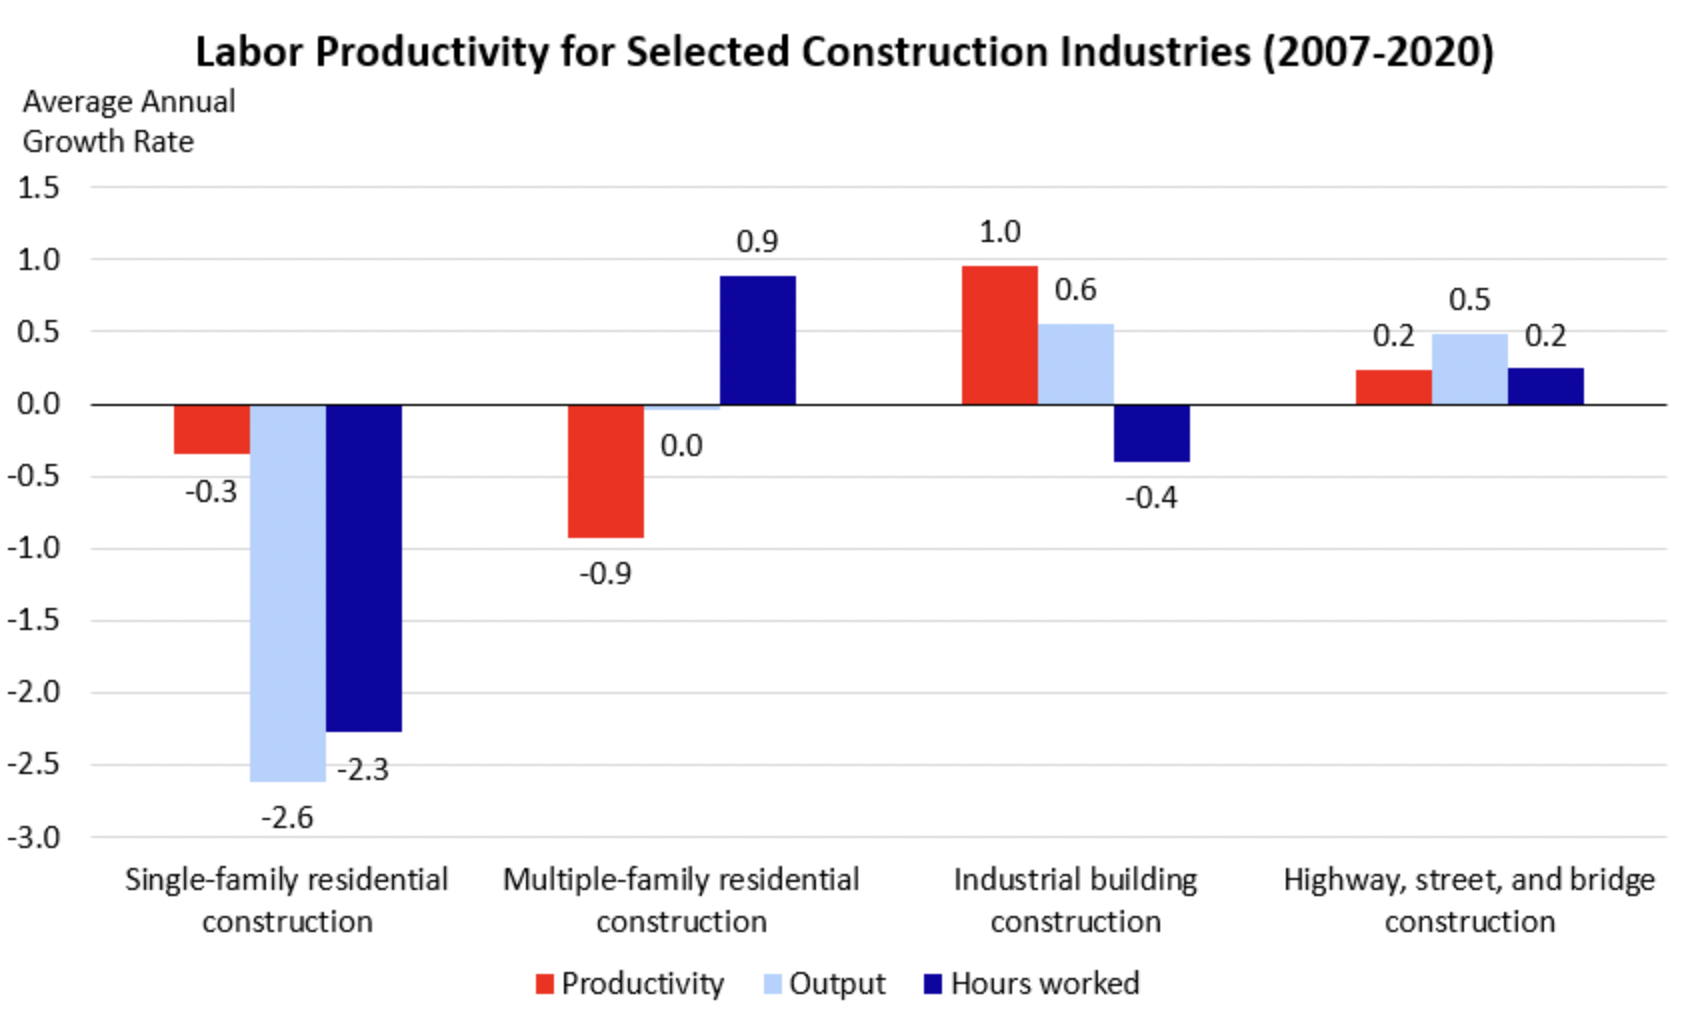 Labor Productivity for select construction industriees